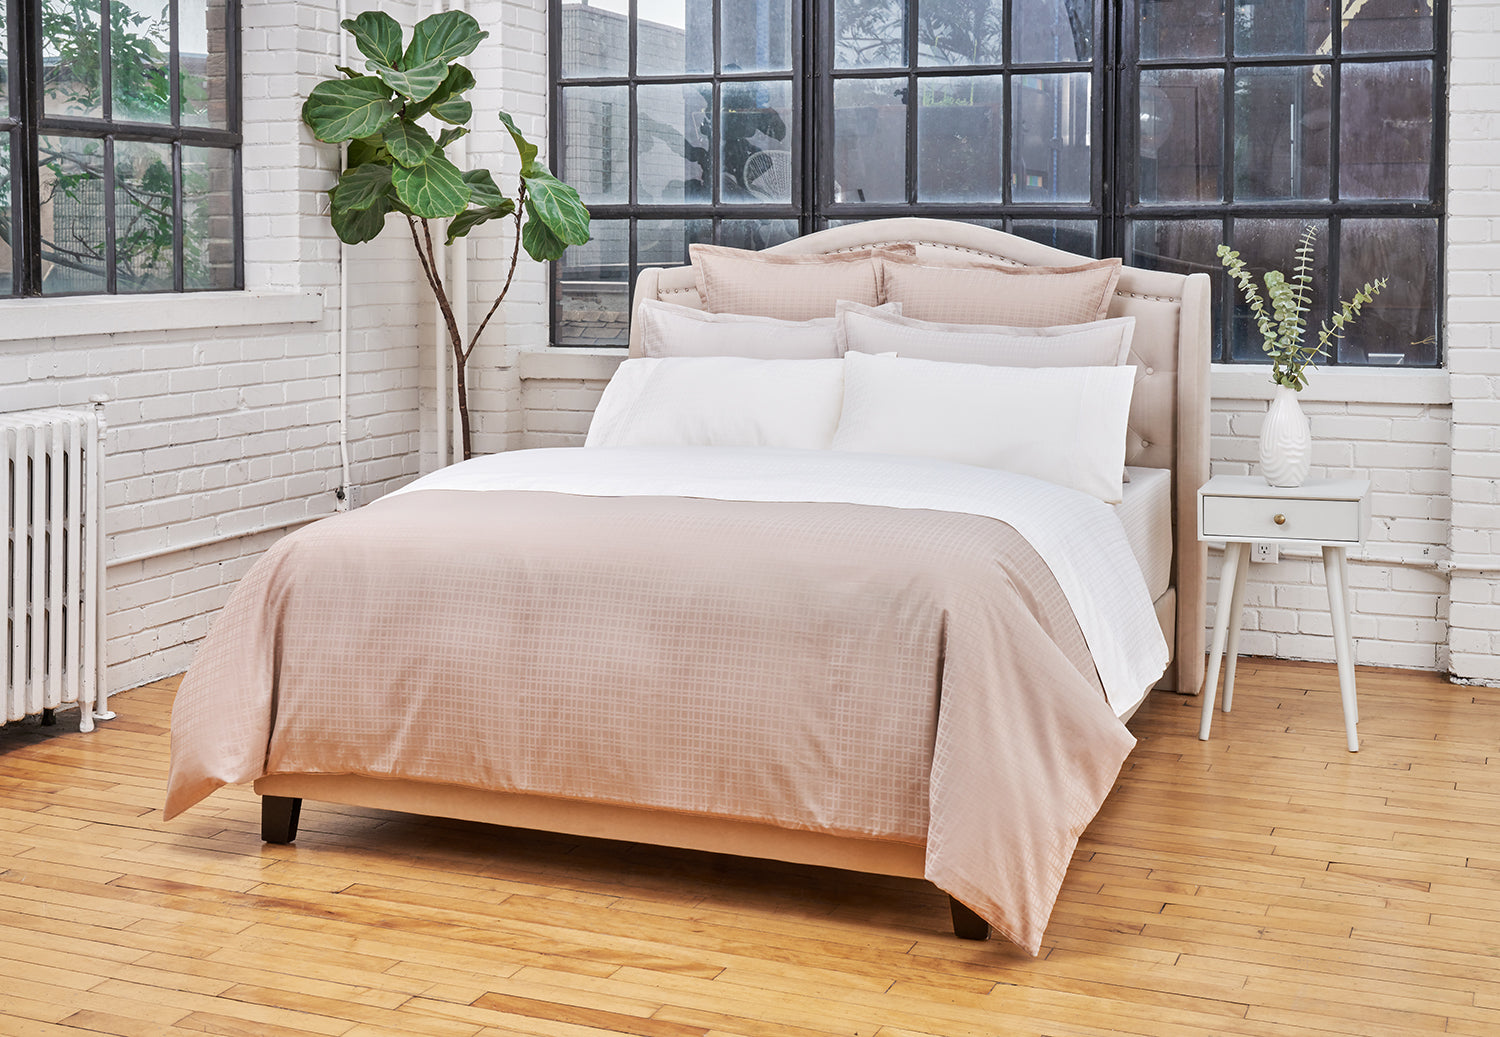 Renaissance Collection Quattro by Cuddledown - at Luxurious Beds and Linens